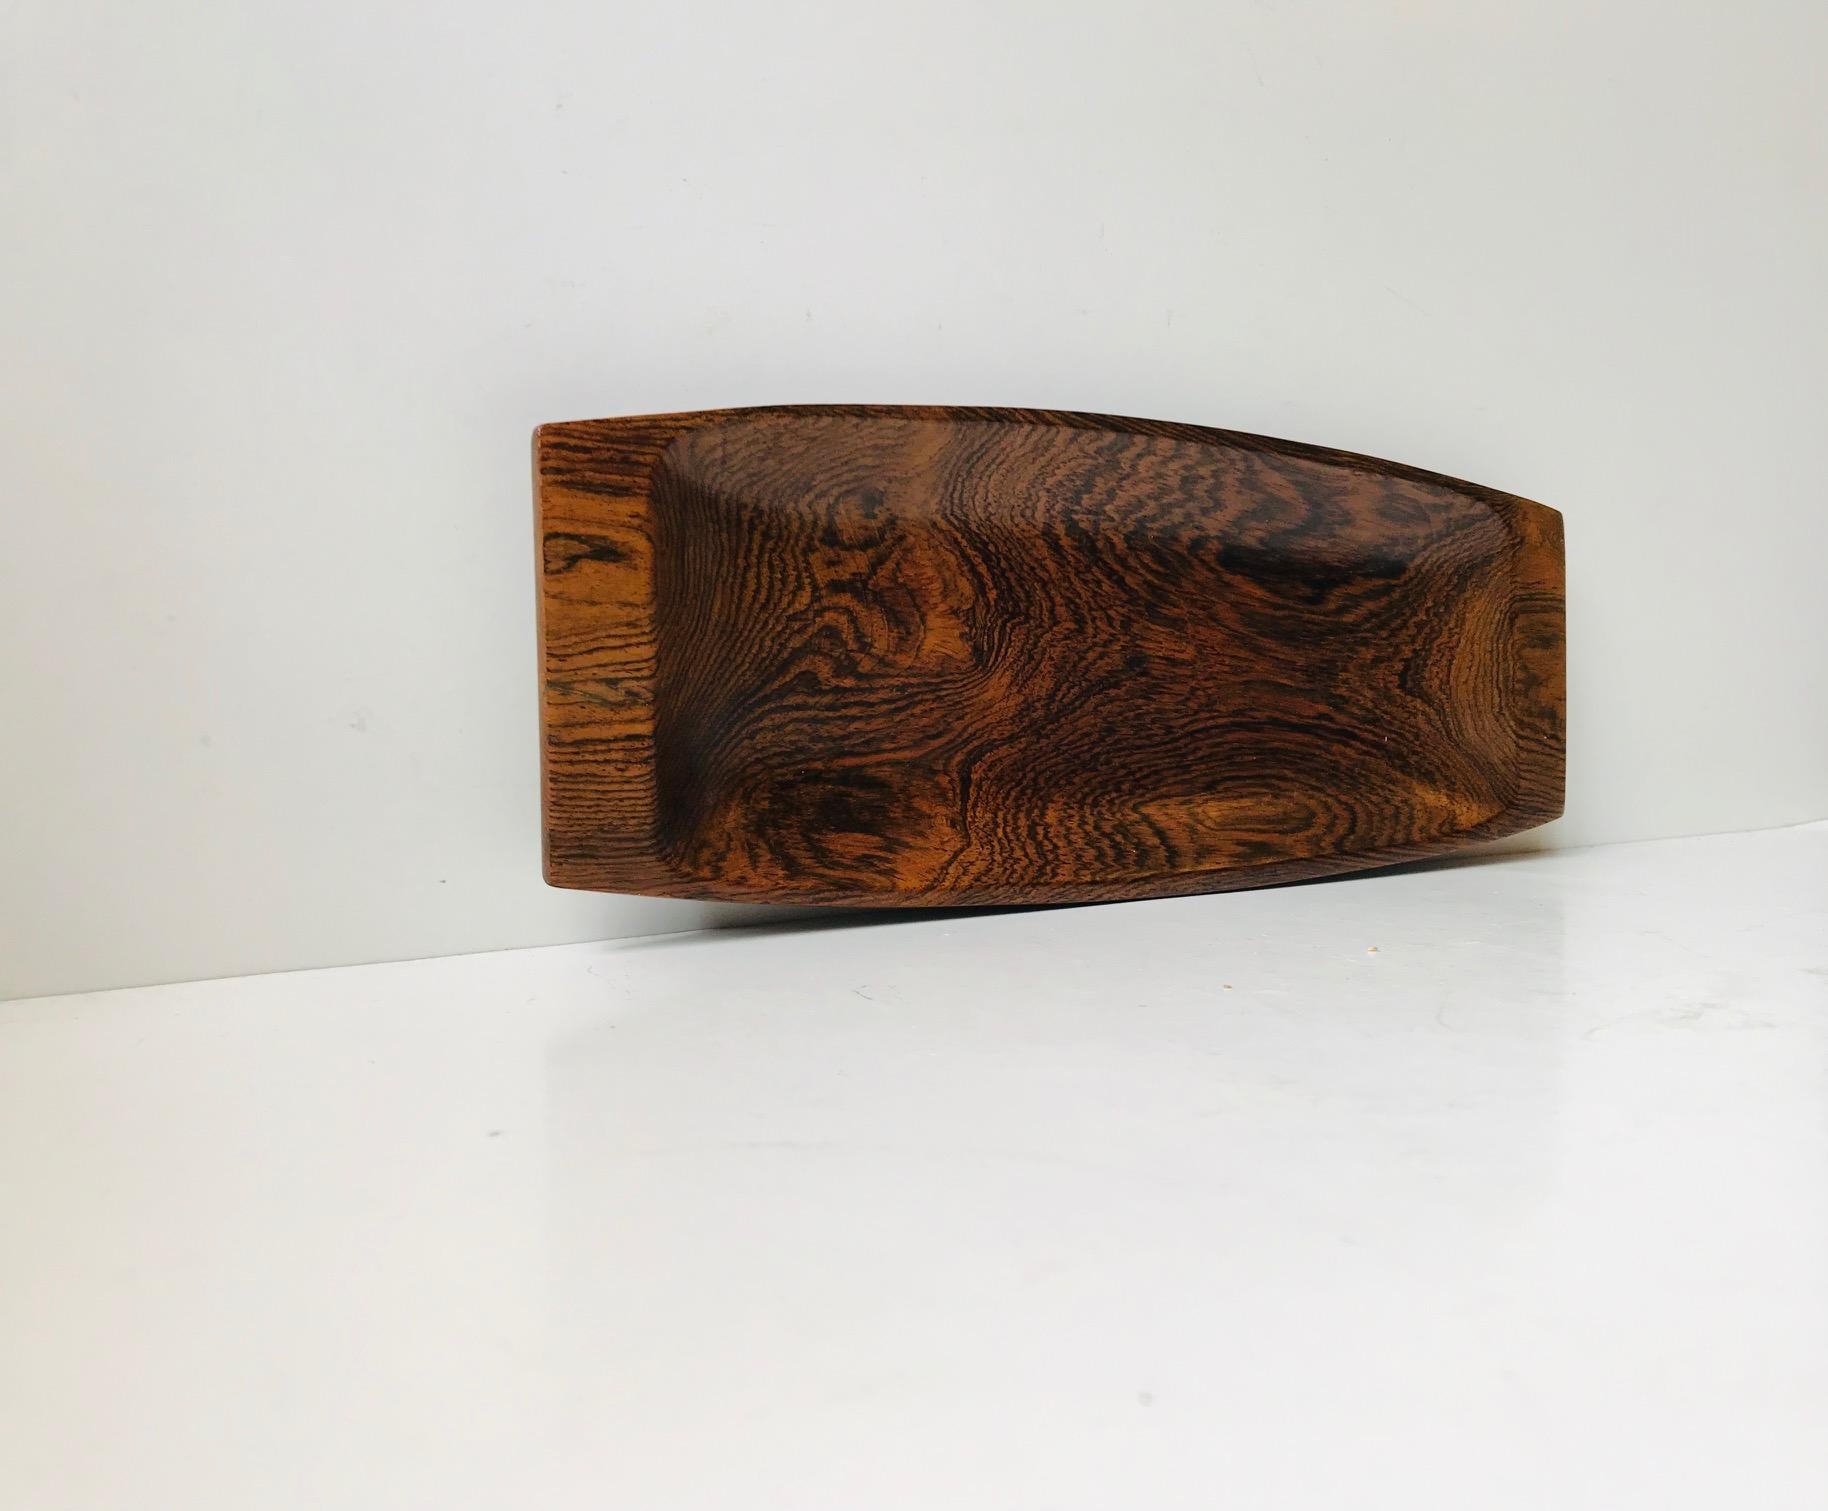 A rare platter or tray carved from a solid piece of Brazilian jacaranda. It was designed during the 1950s by Jean Gillon and manufactured by WoodArt for Georg Jensen in Denmark. These pieces were sold in Illums Bolighus and 'Den Permanente' in